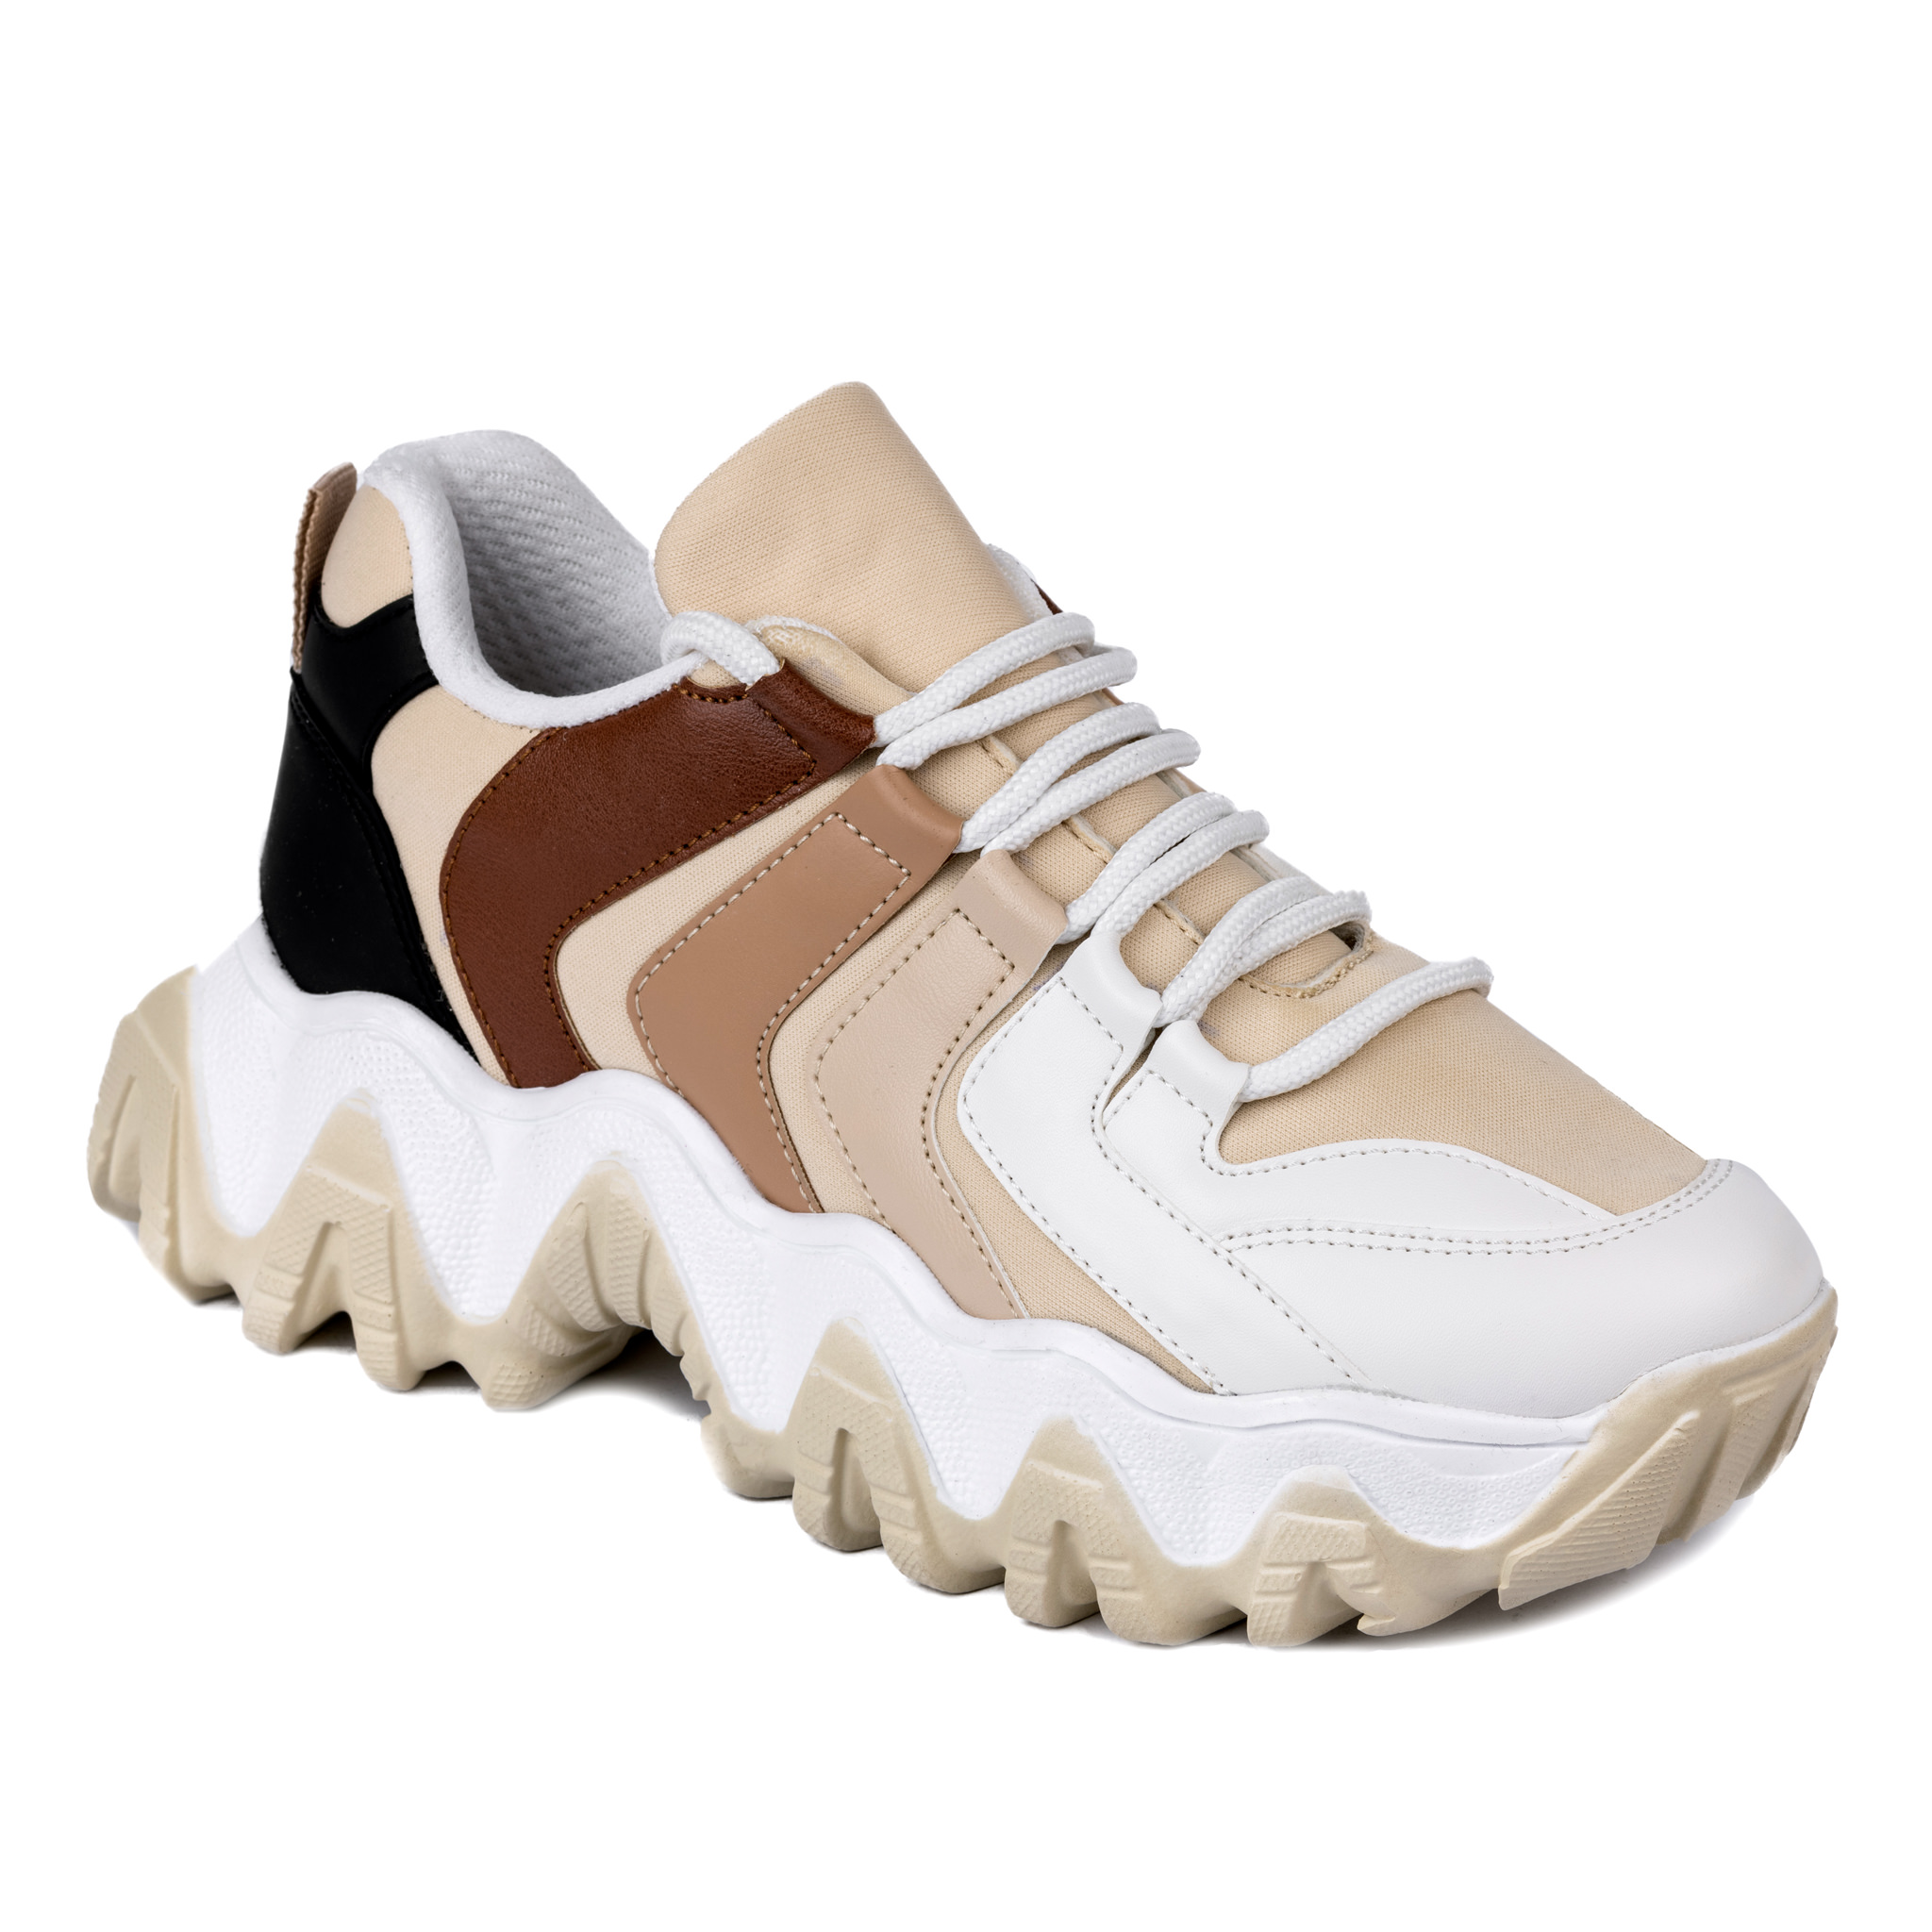 HIGH SOLE SNEAKERS - WHITE/BEIGE